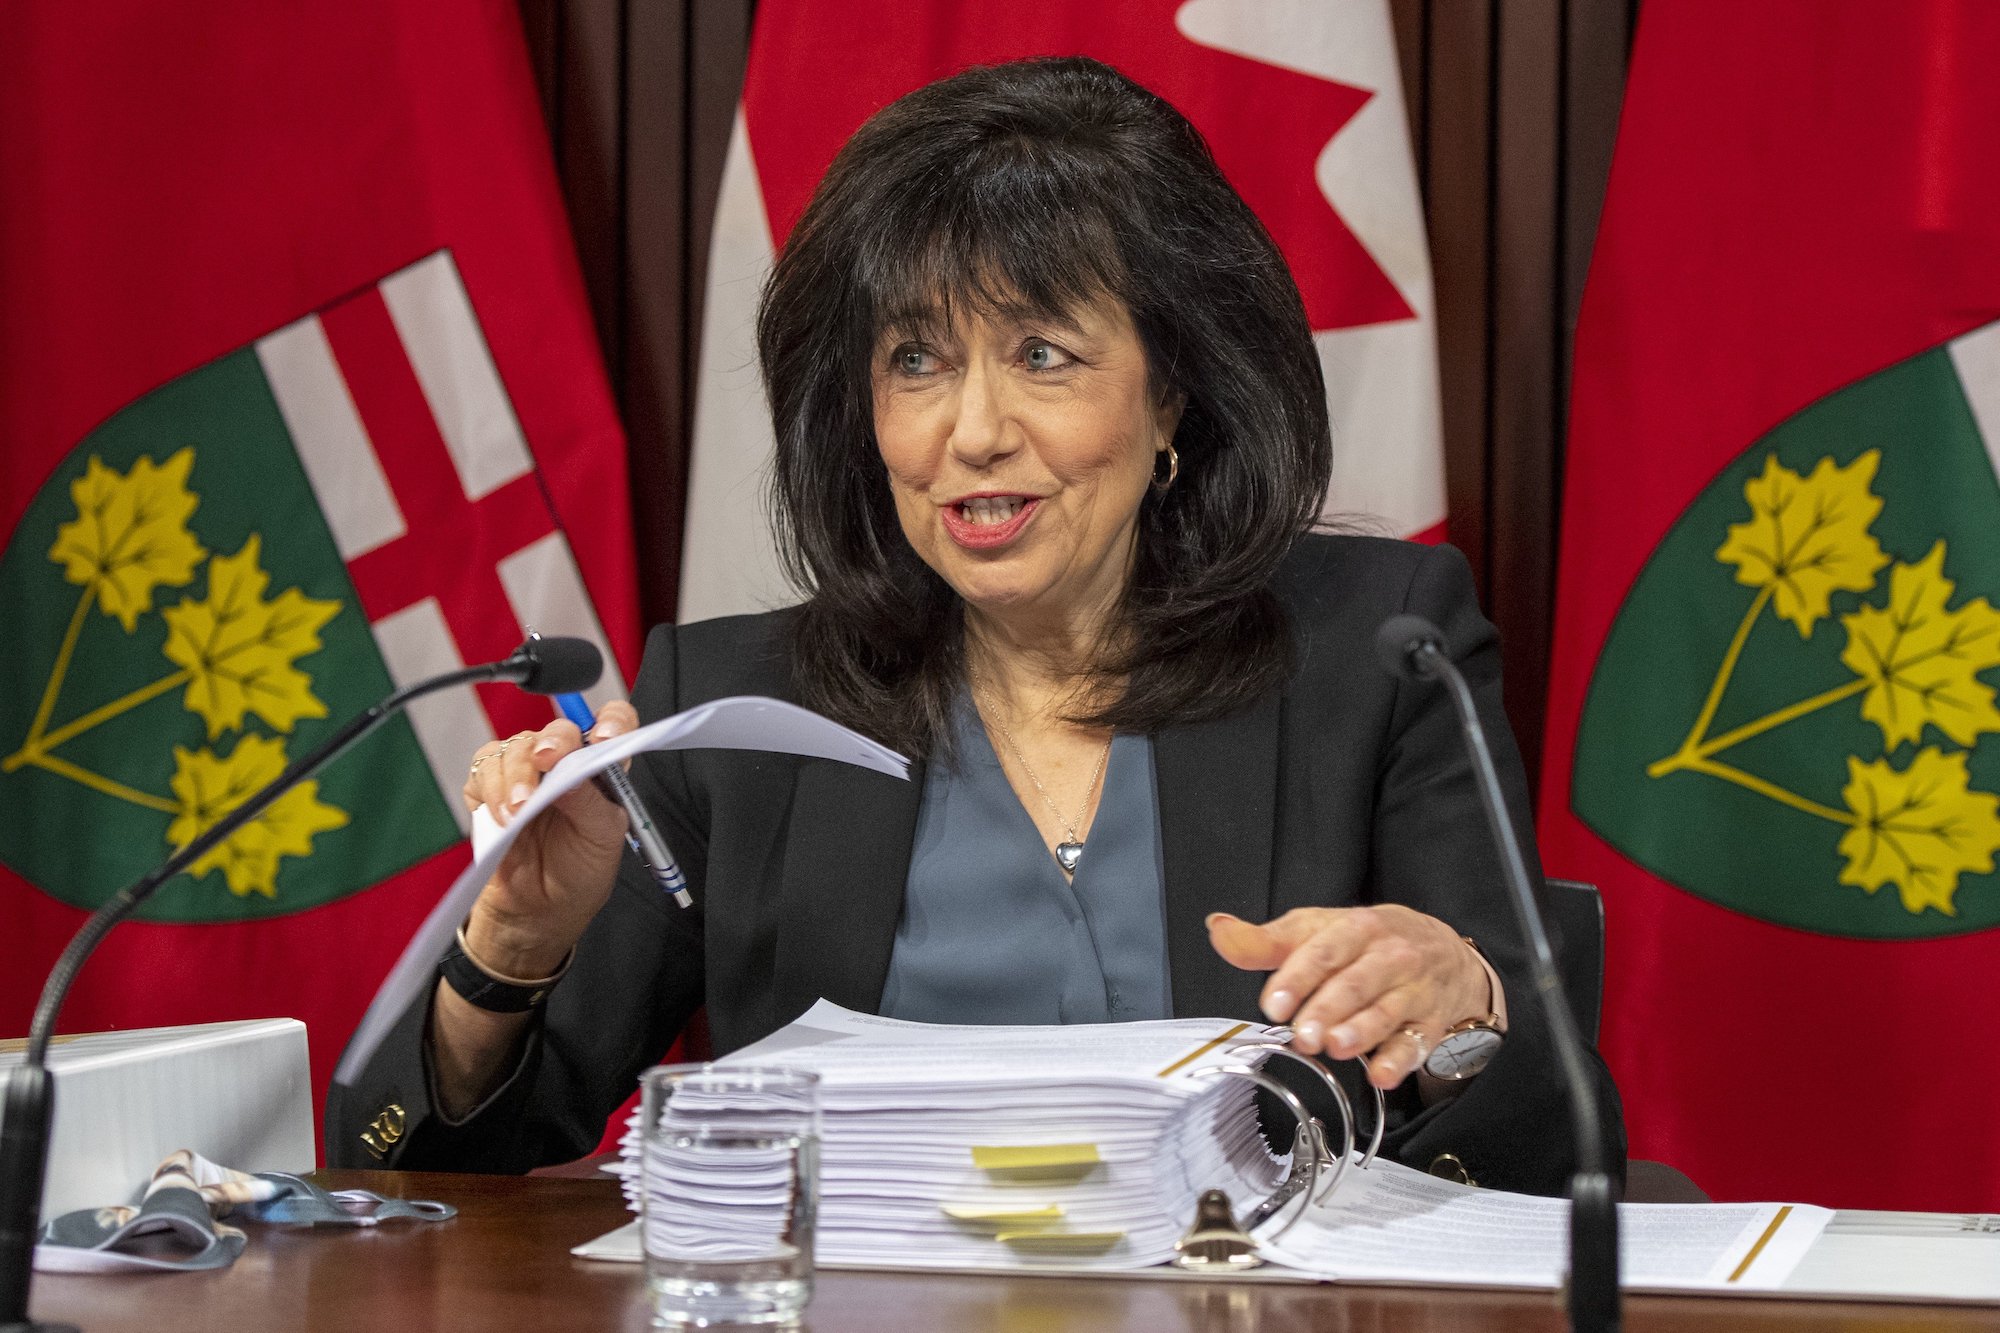 From highways to health care, Ontario's auditor general chastises Ford government